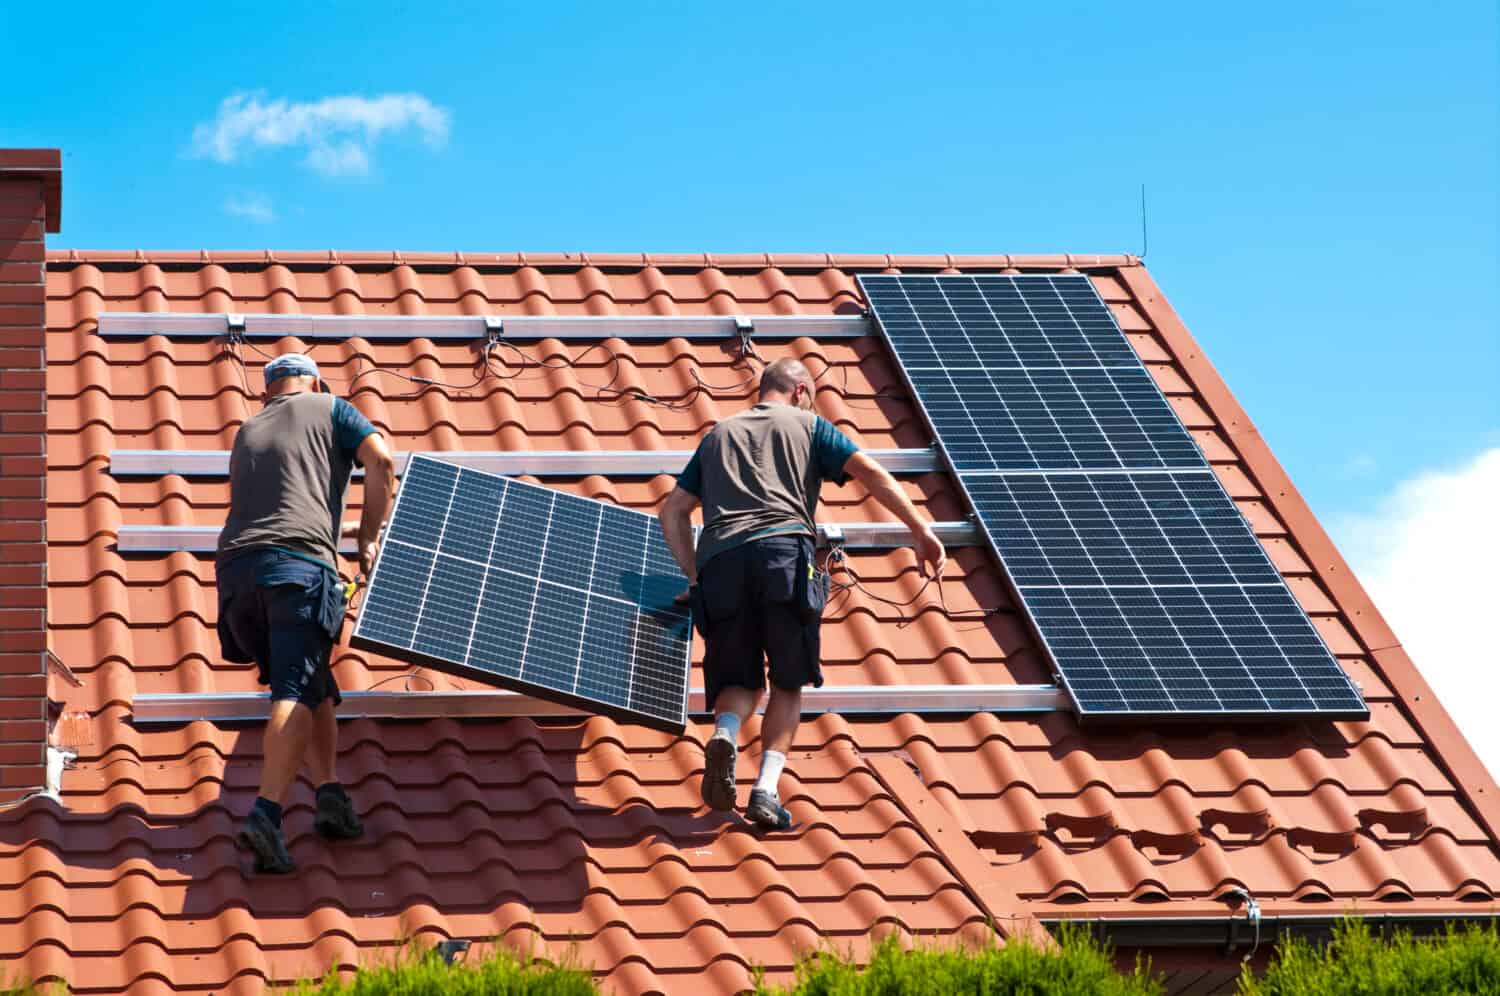 Two men installing new solar panels on the roof of a private house.